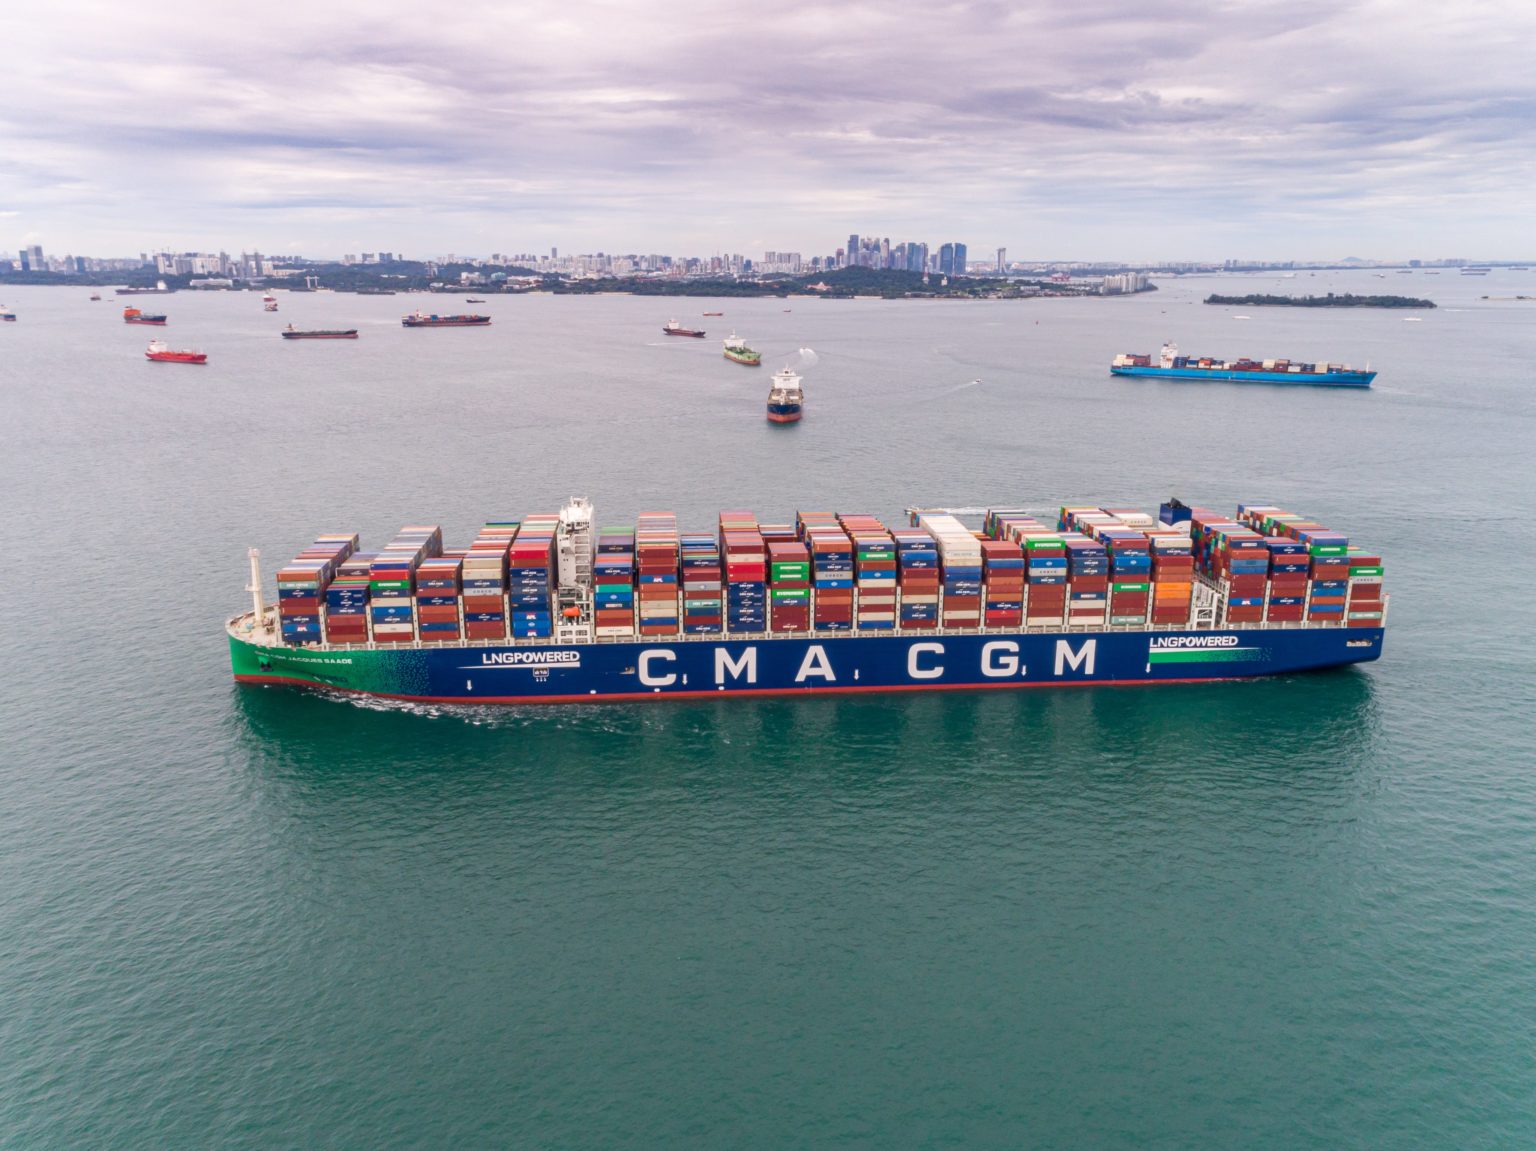 cma-cgm-orders-22-containerships-at-cssc-india-shipping-news